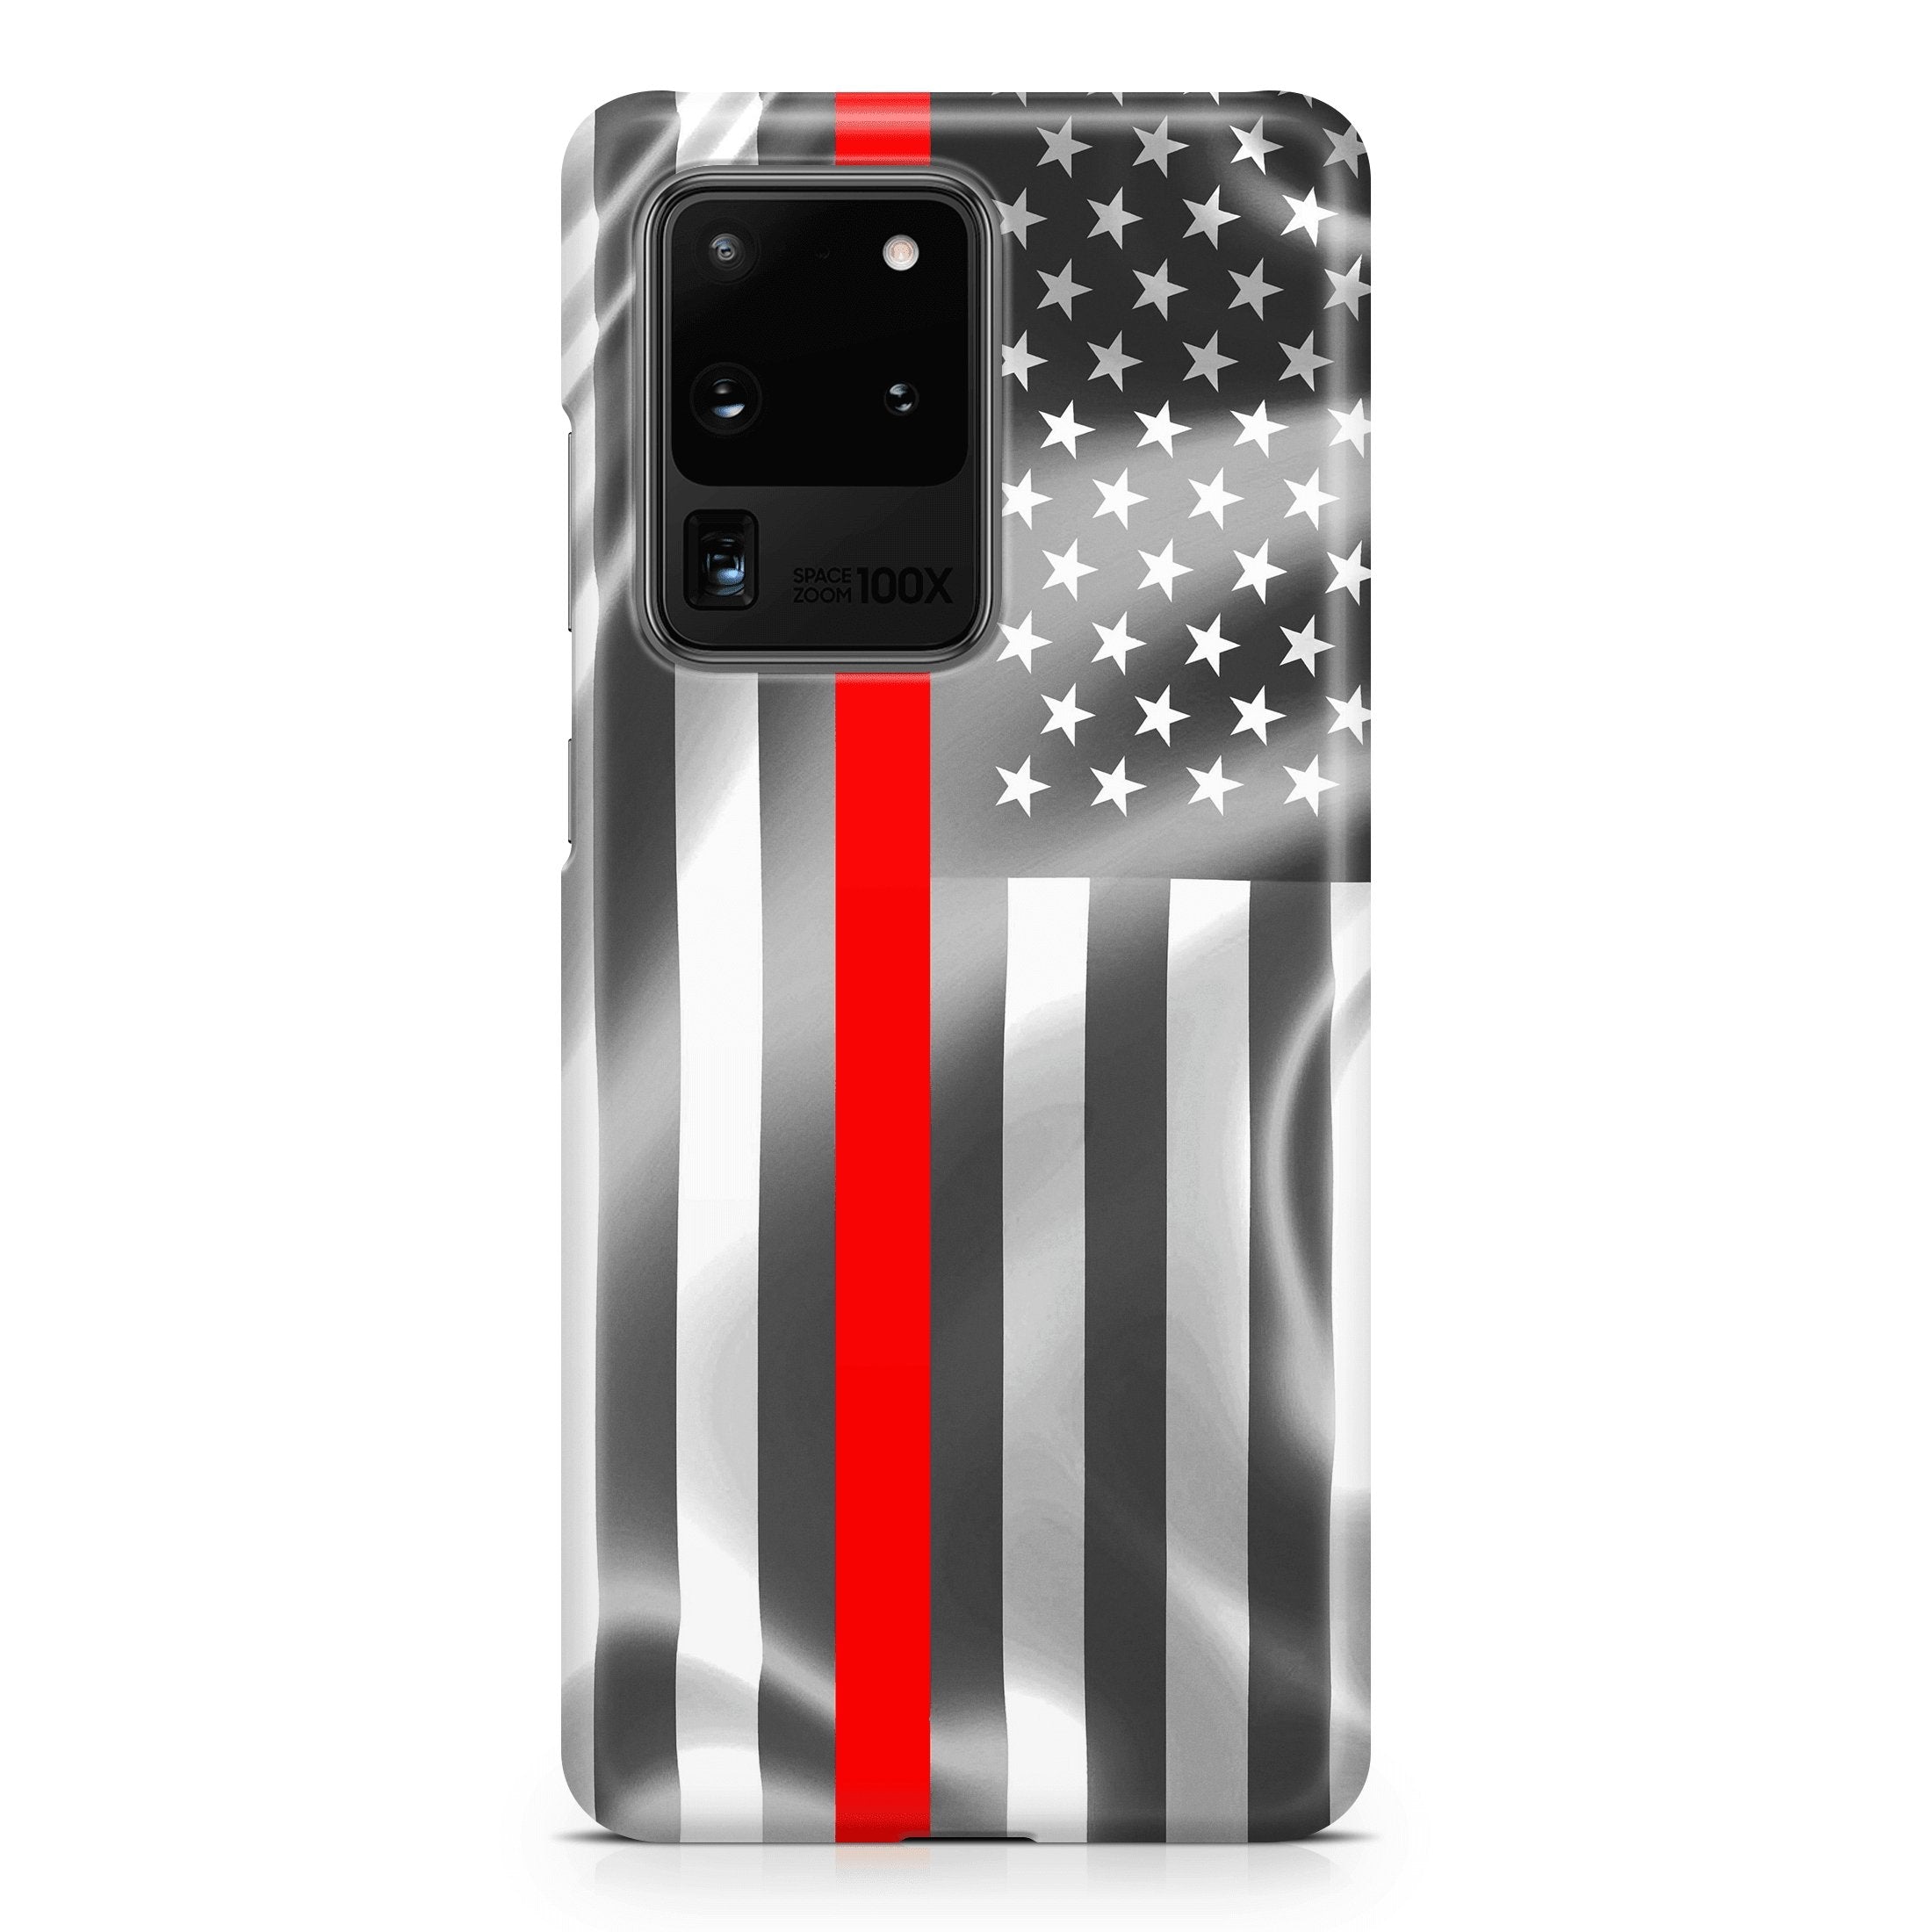 Thin Red Line - Samsung phone case designs by CaseSwagger